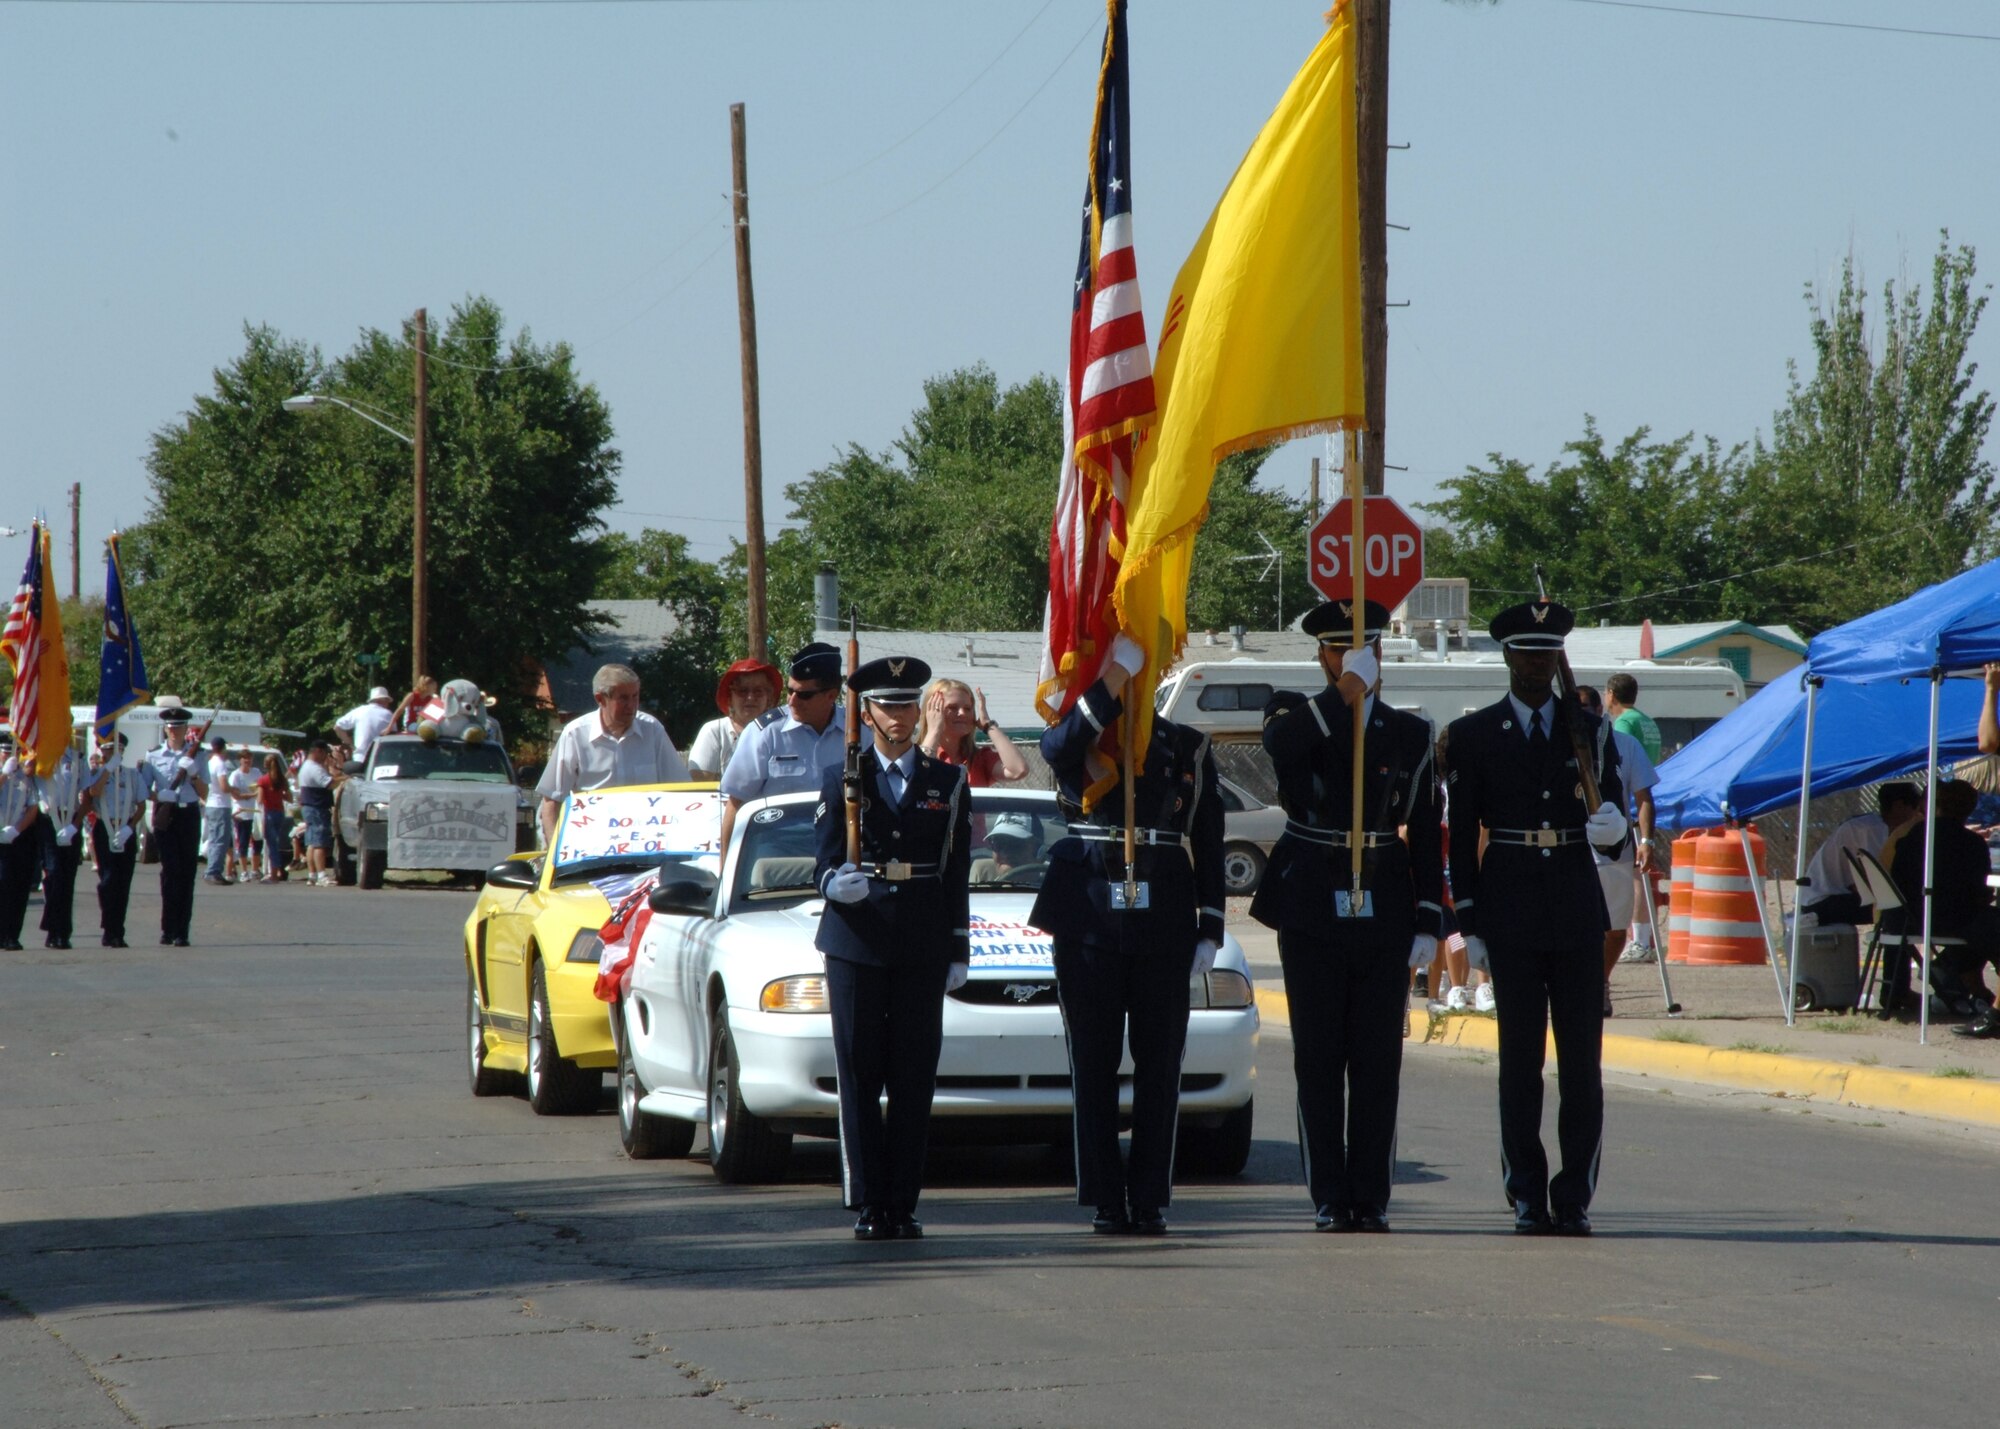 Members of the Steel Talons Honor Guard Team march in the Alamogordo Independence Day celebration July 4. Groups came from throughout the community to take part in the celebration. (U.S. Air Force photo by Airman 1st Class Tiffany Trojca)